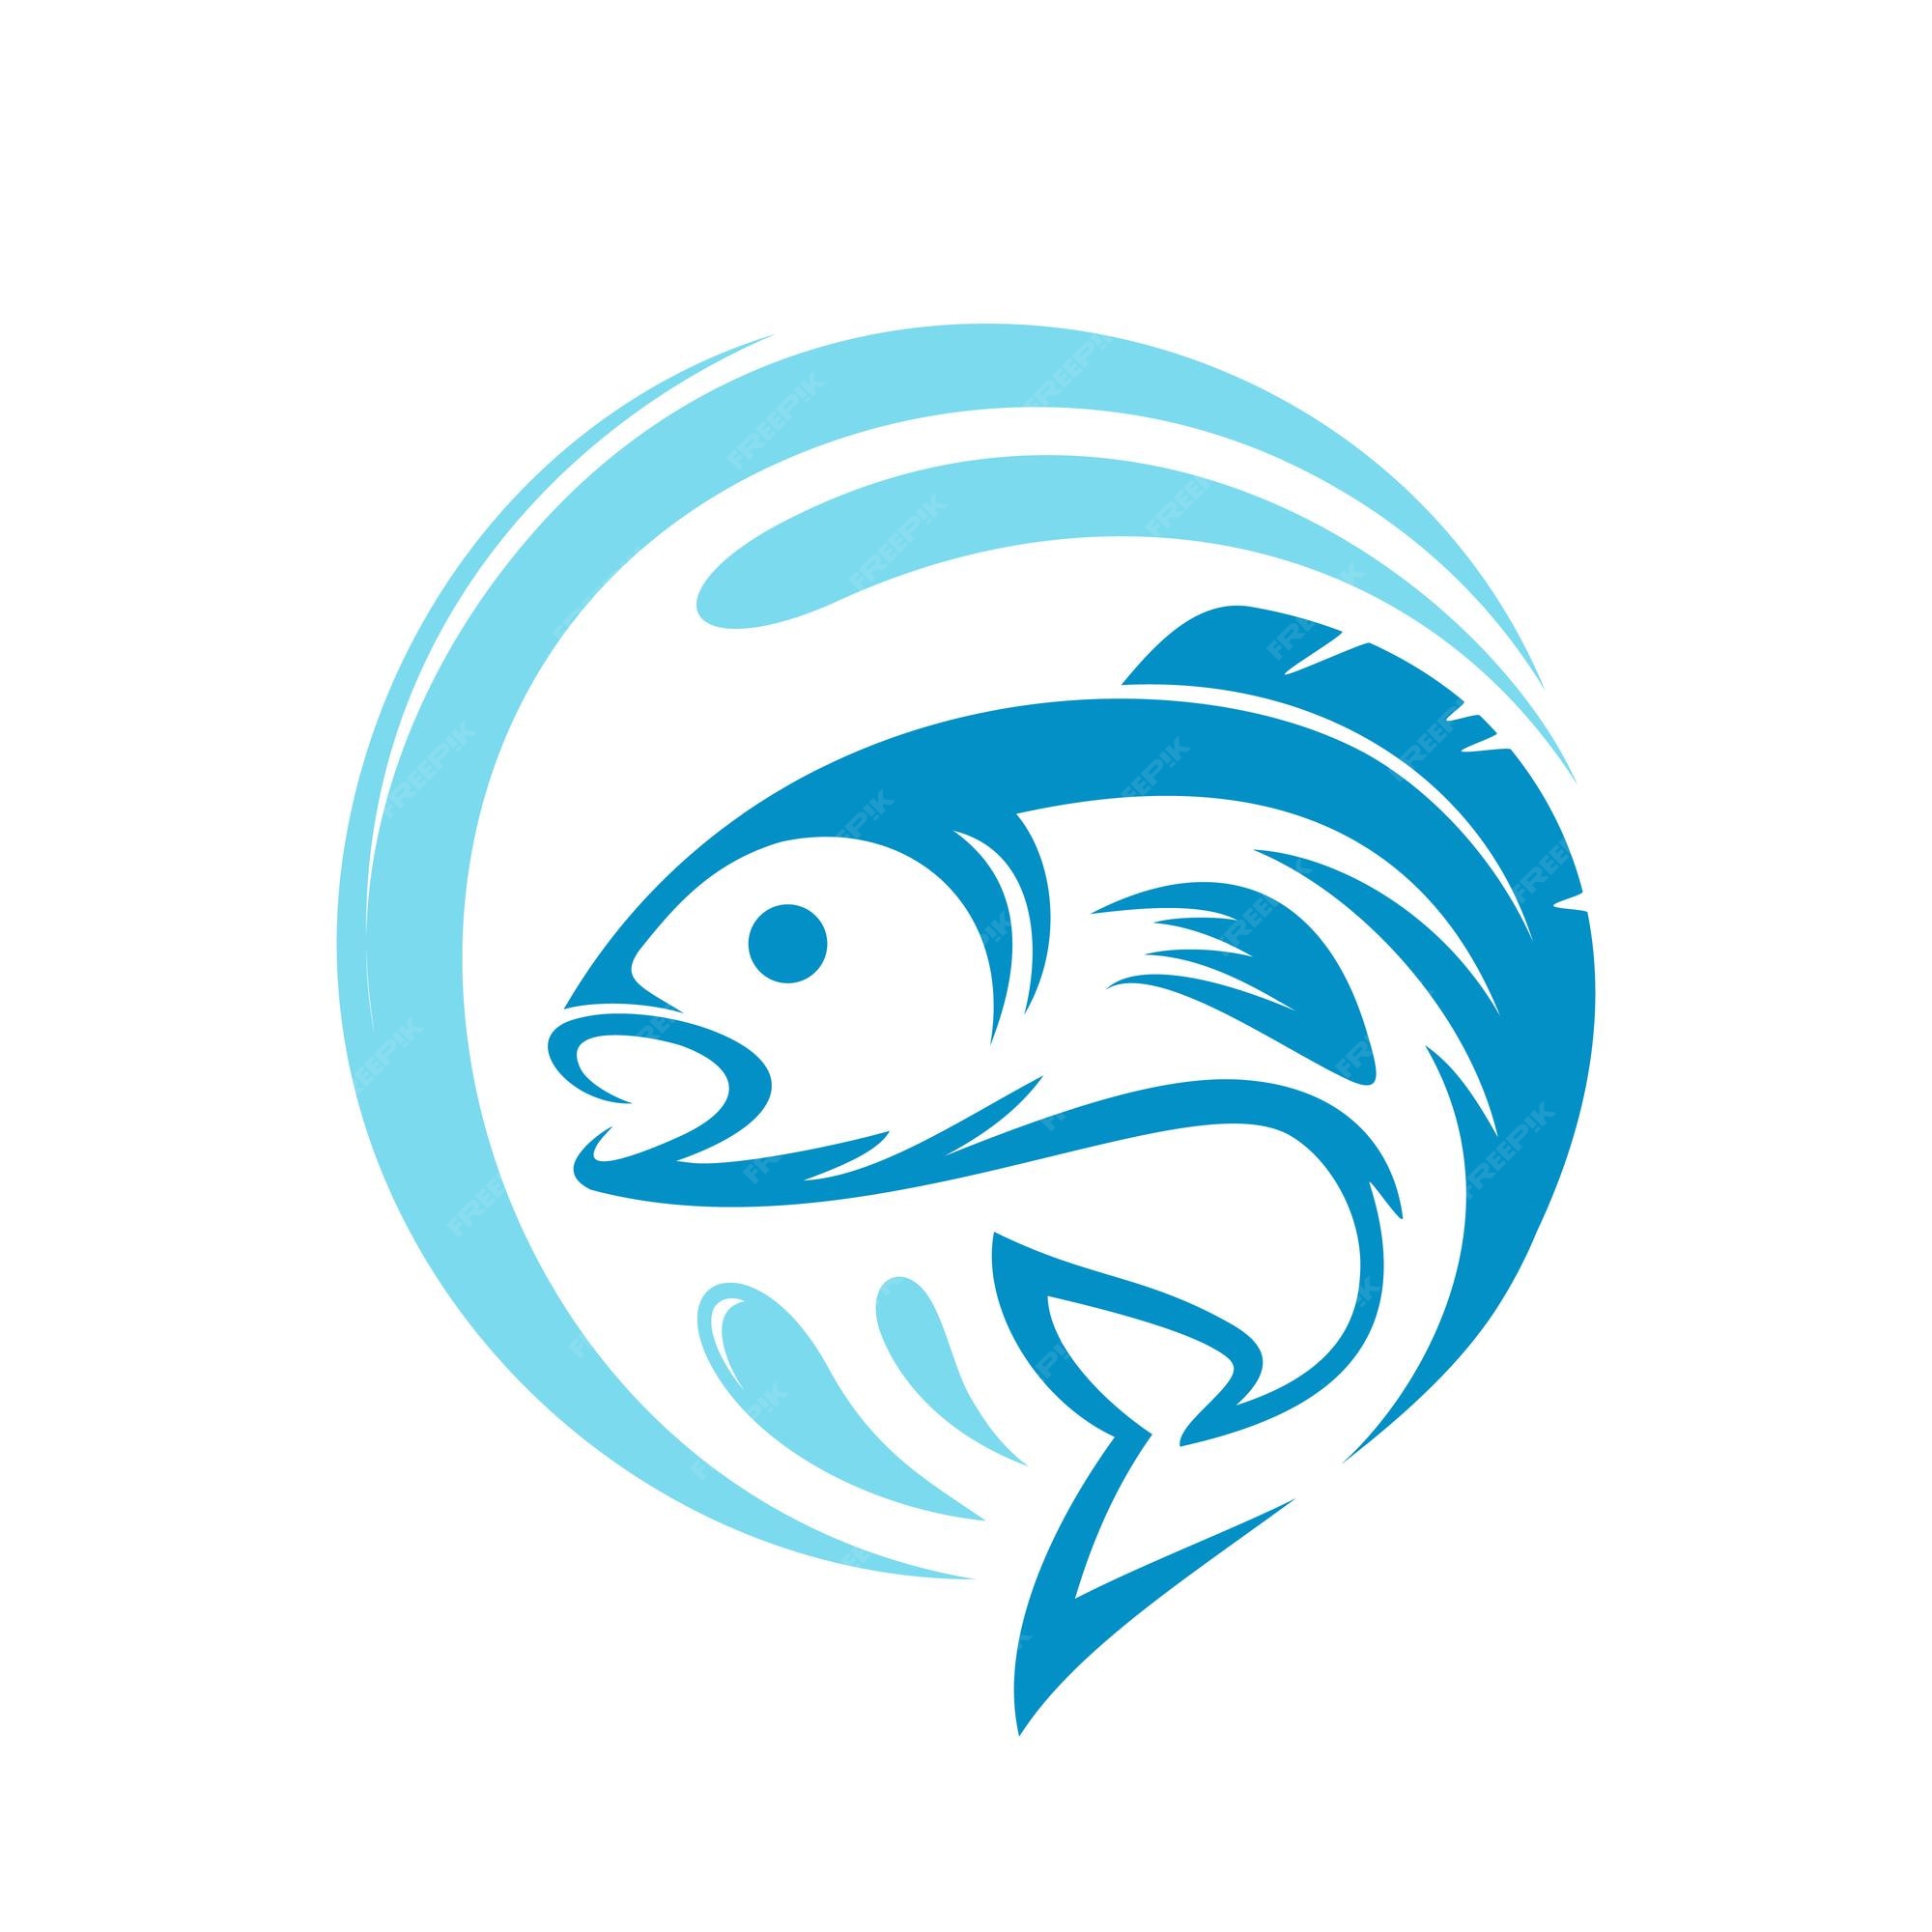 Premium Vector | Vector graphic of abstract fish logo design template